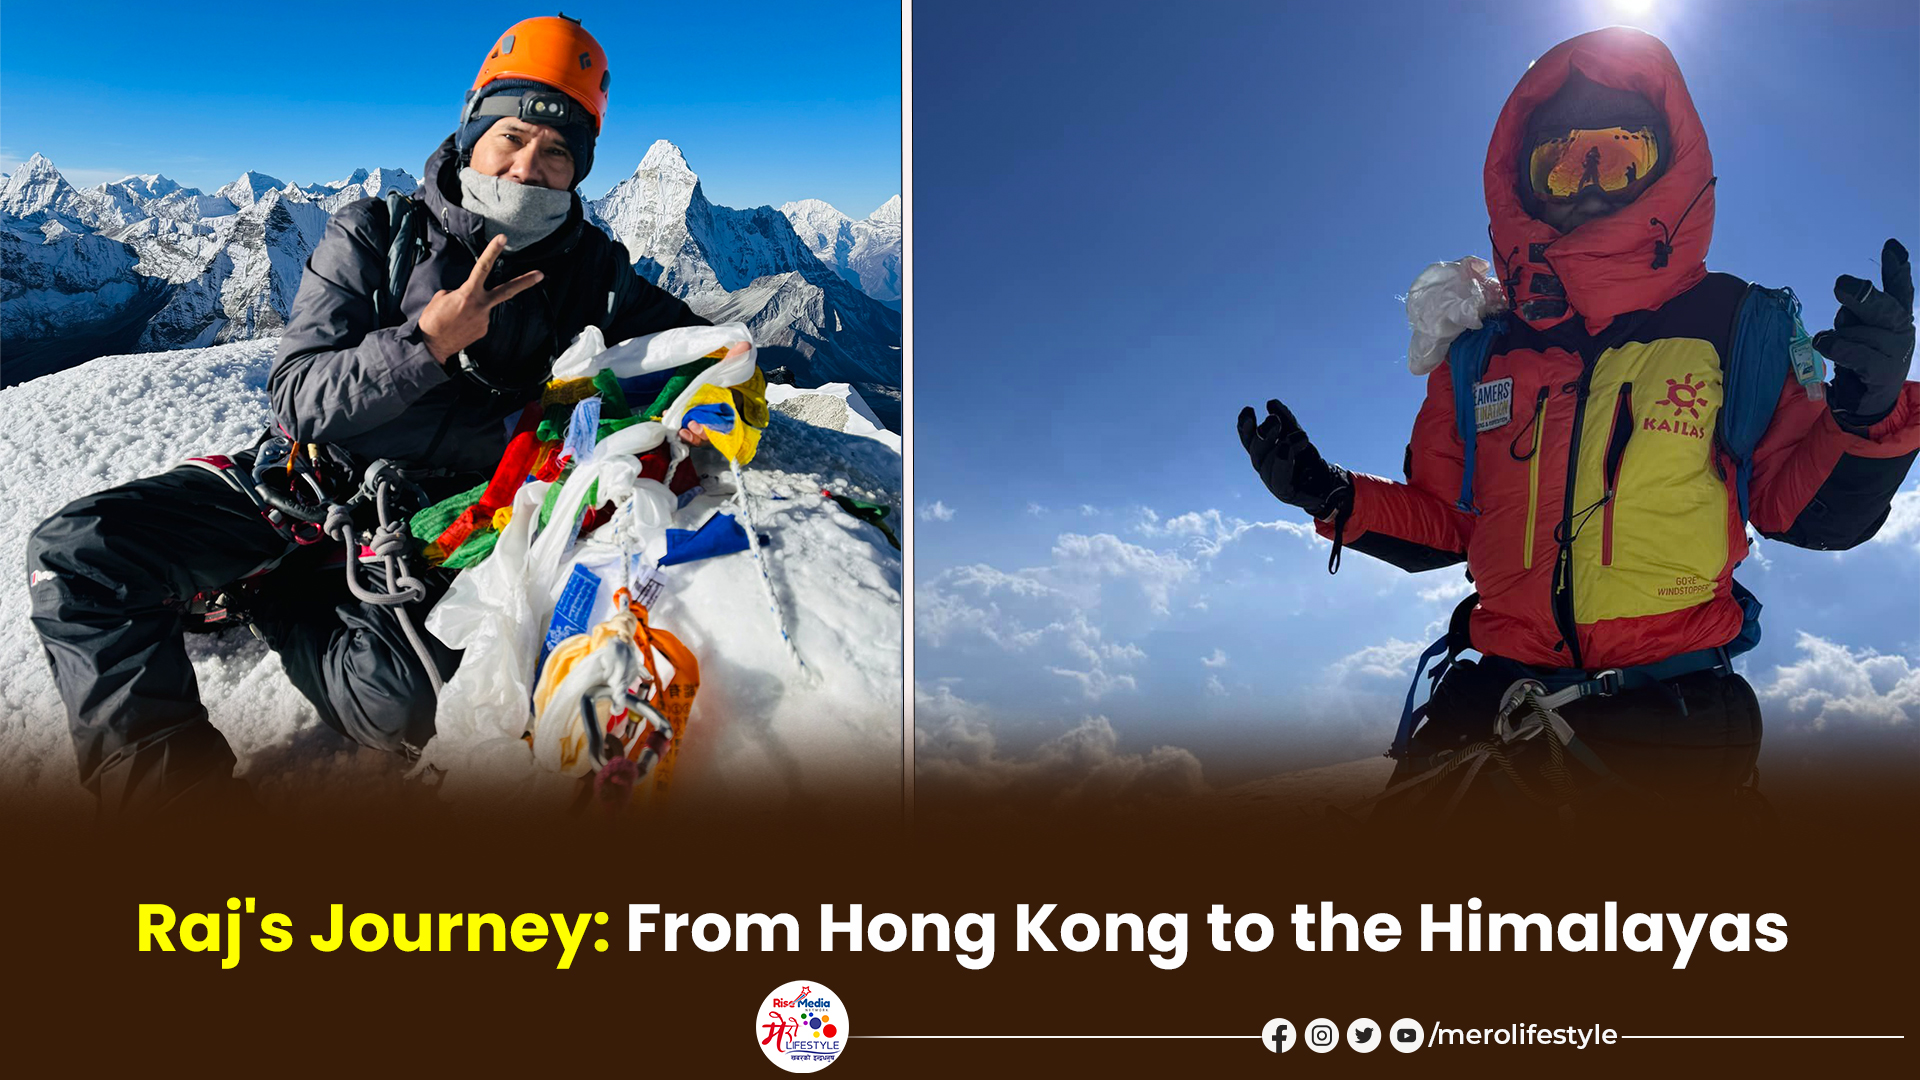 Raj’s Journey: From Hong Kong to the Himalayas